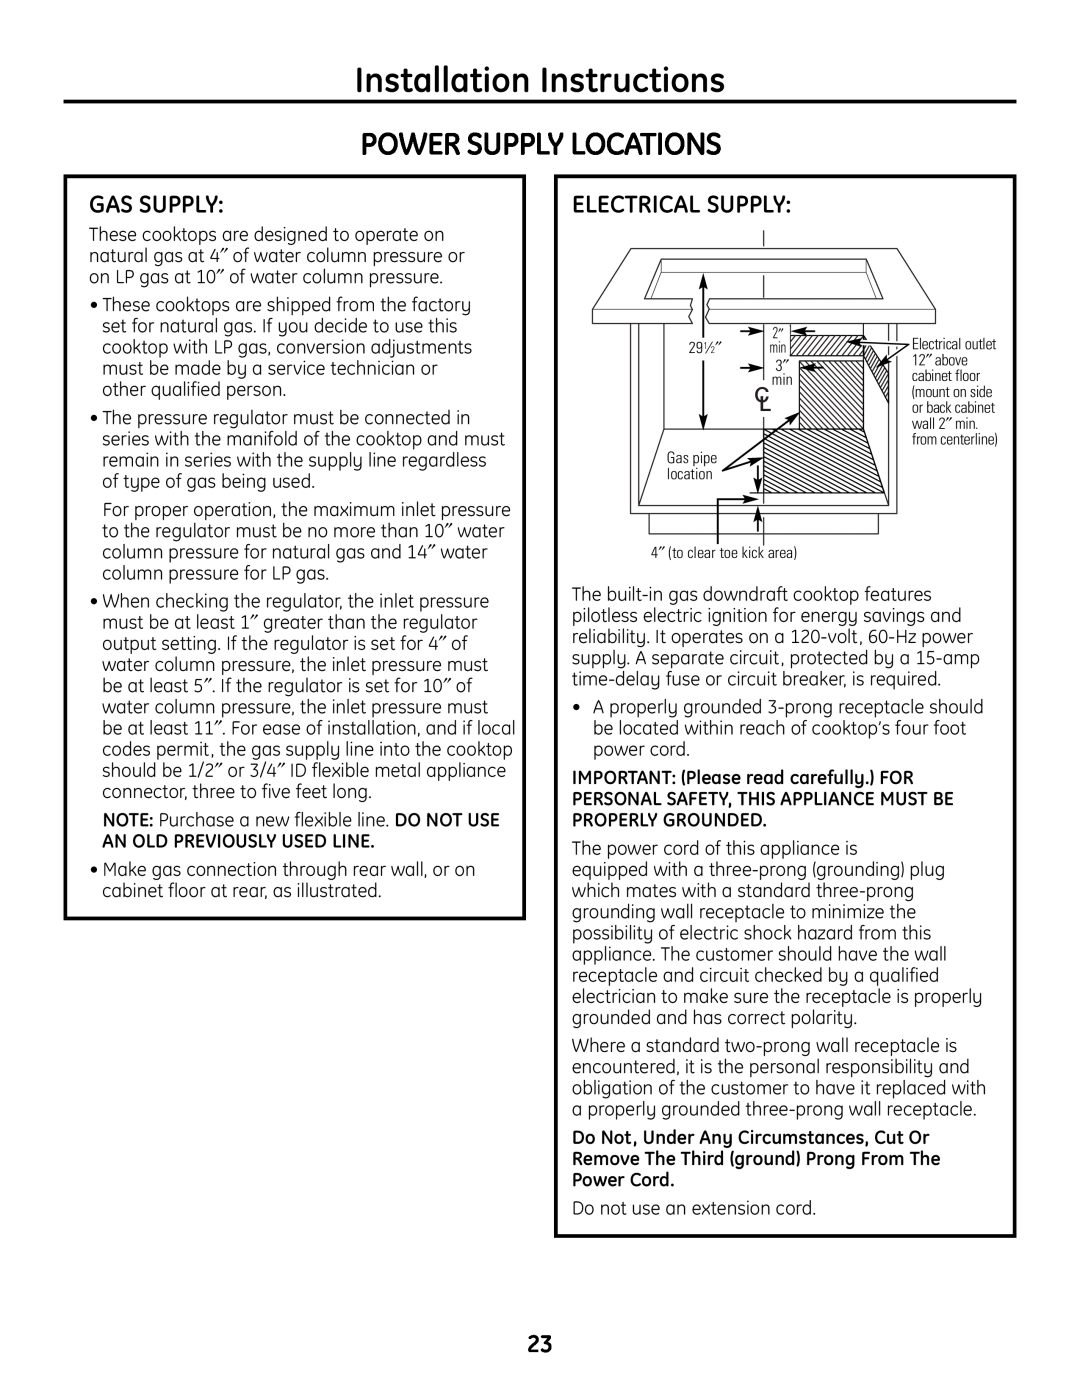 GE PGP989 Power Supply Locations, Installation Instructions, Gas Supply, Electrical Supply, An Old Previously Used Line 